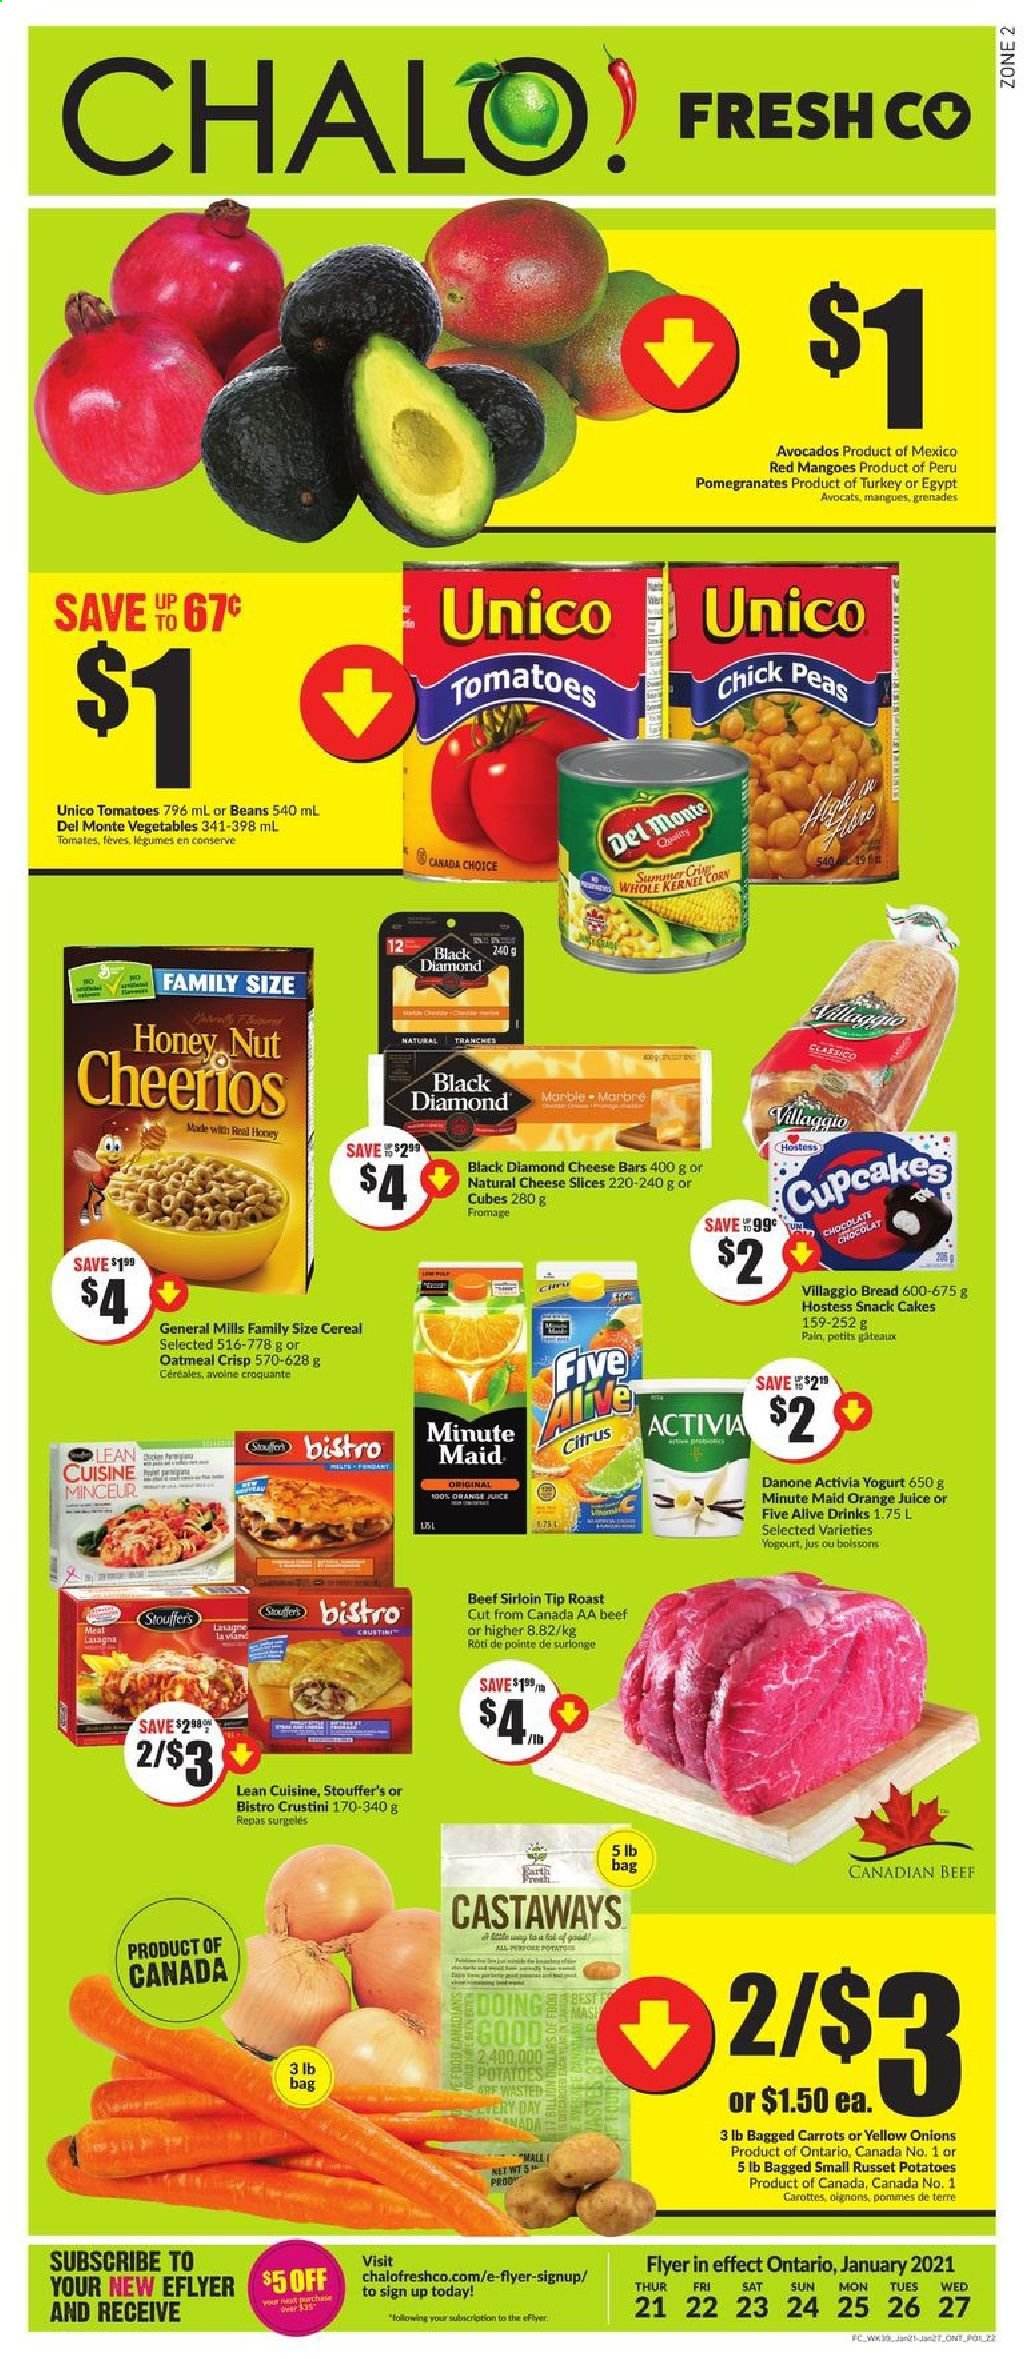 thumbnail - Chalo! FreshCo. Flyer - January 21, 2021 - January 27, 2021 - Sales products - bread, cake, cupcake, beans, carrots, corn, russet potatoes, tomatoes, potatoes, peas, onion, avocado, mango, pomegranate, lasagna meal, Lean Cuisine, sliced cheese, cheese, yoghurt, Activia, Stouffer's, chocolate, snack, oatmeal, cereals, orange juice, juice, fruit punch, beef meat, beef sirloin, Danone. Page 1.